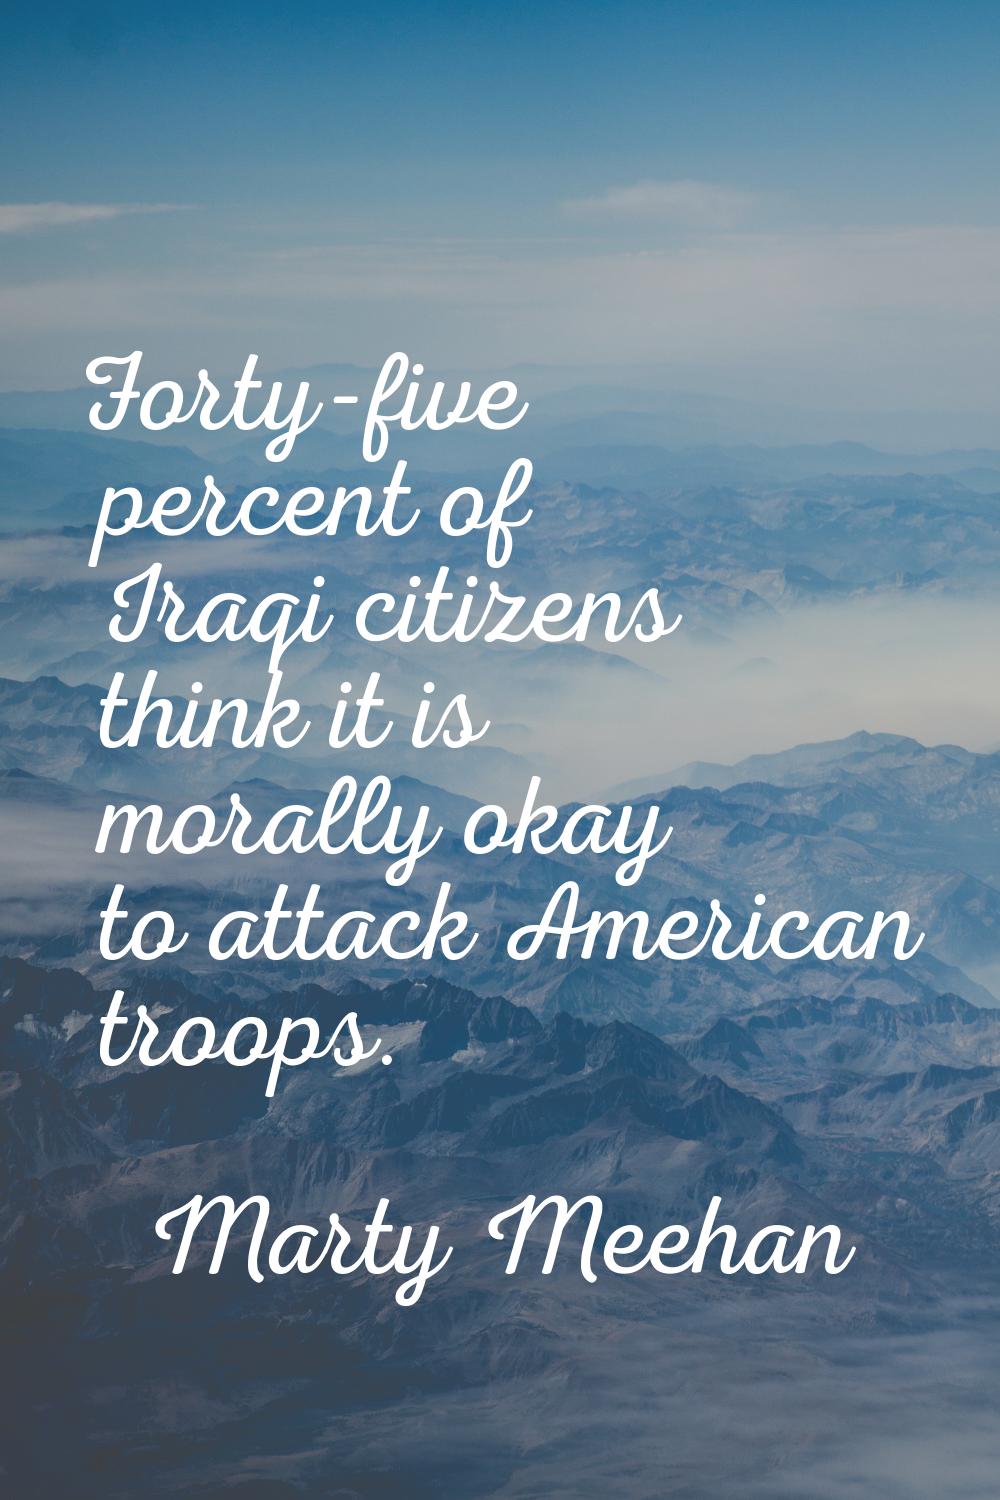 Forty-five percent of Iraqi citizens think it is morally okay to attack American troops.